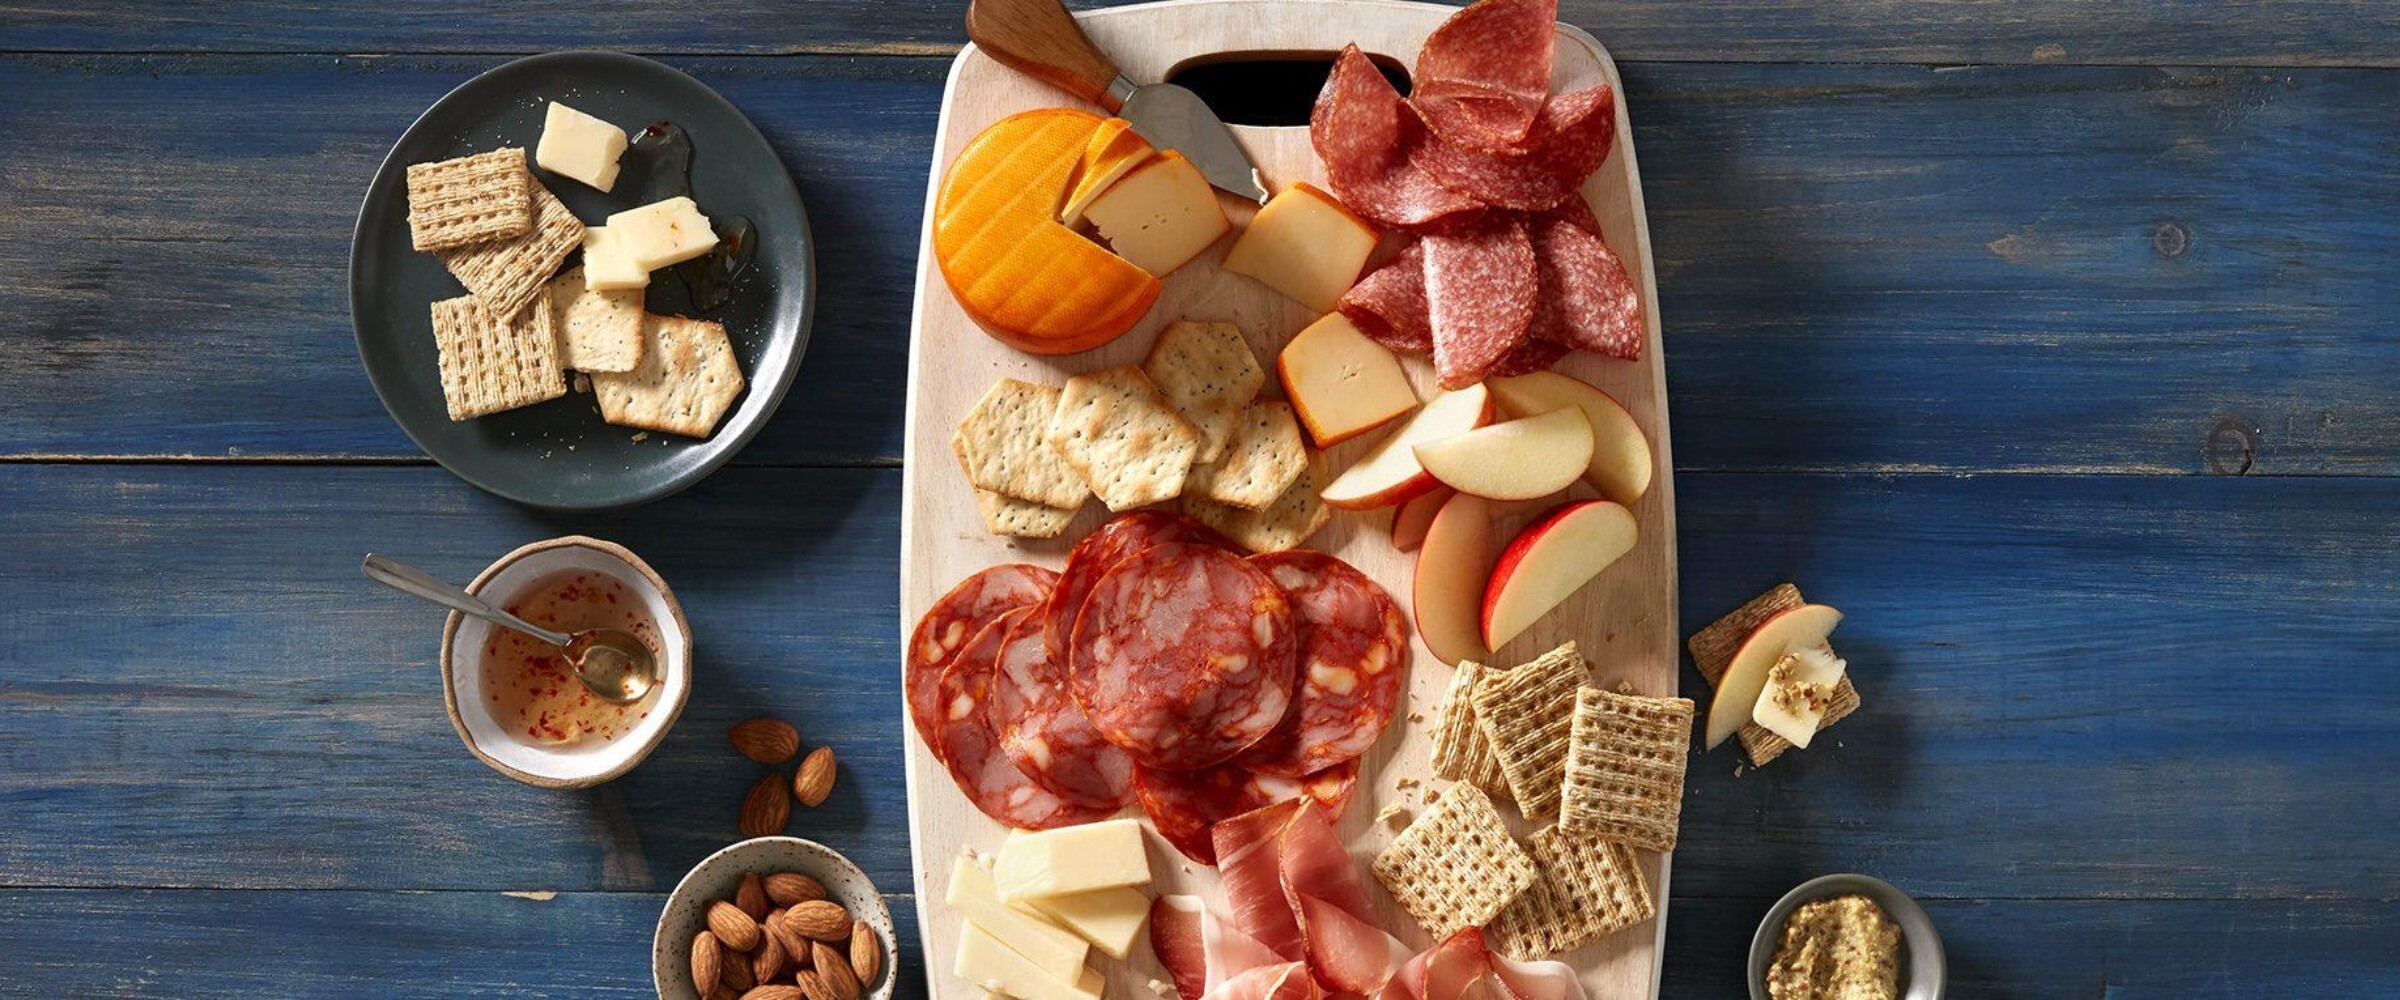 Simple charcuterie board with three meats and cheese